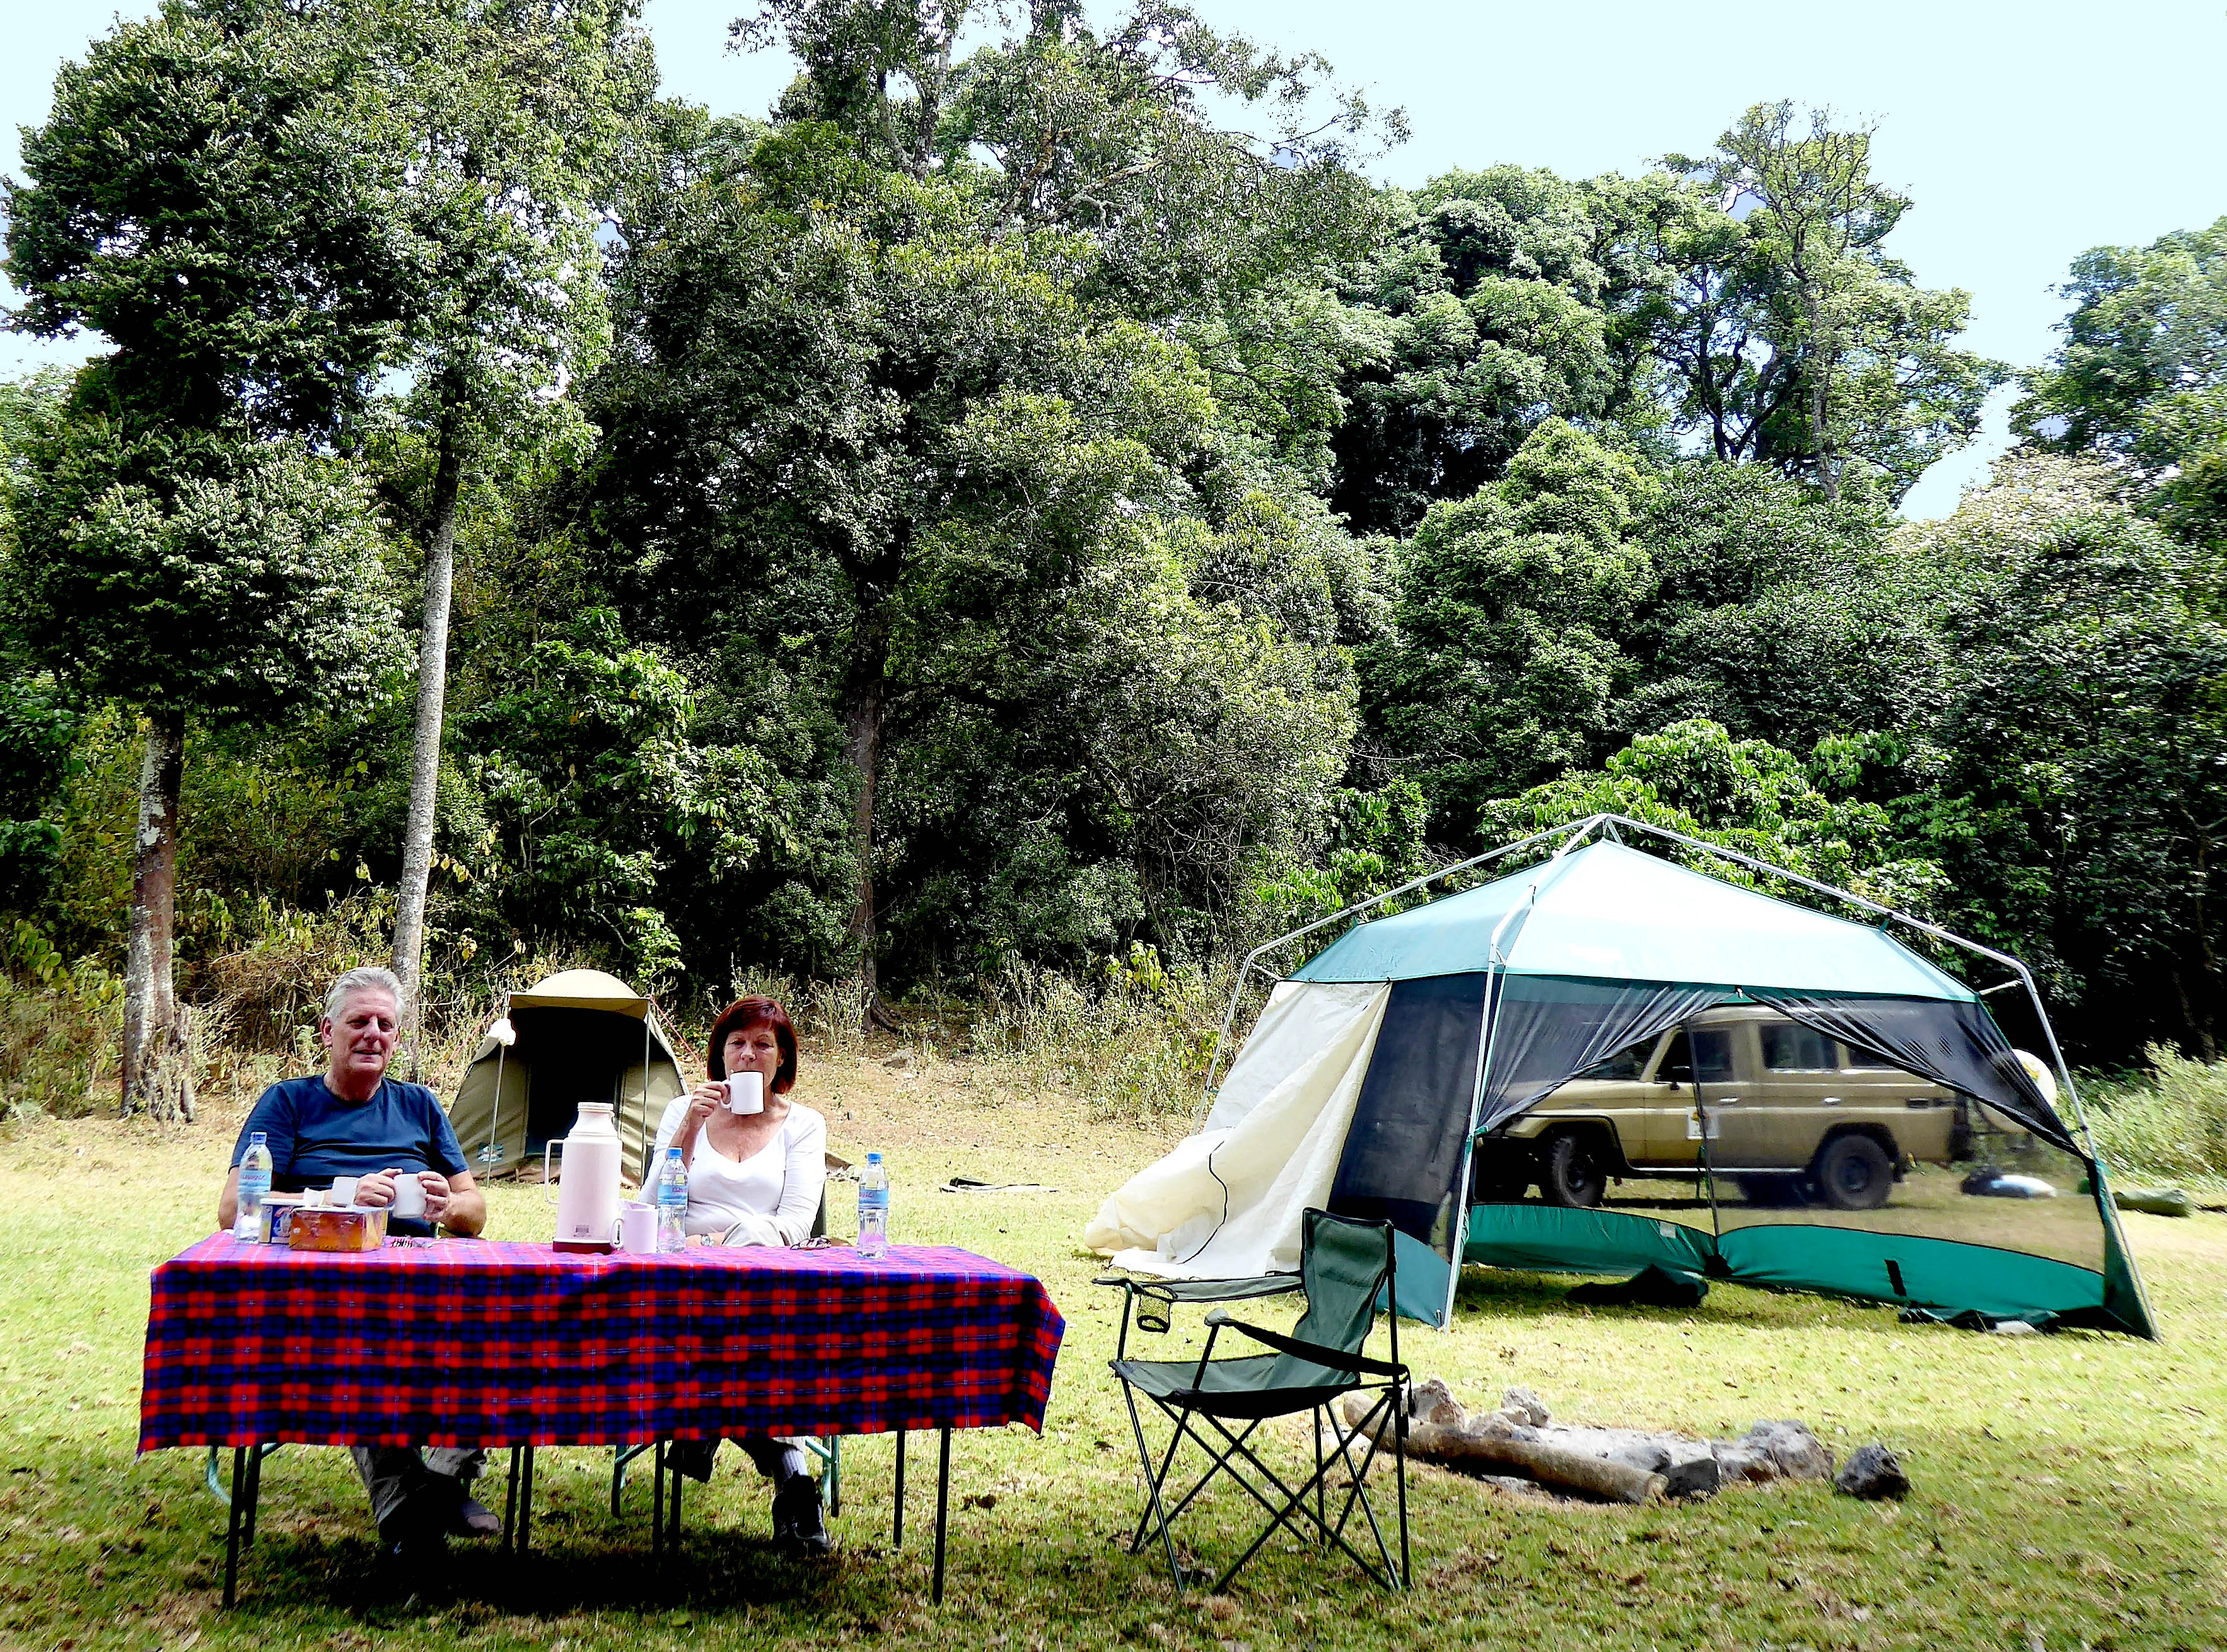 Enjoy the relaxed camping safari of I dream of Africa